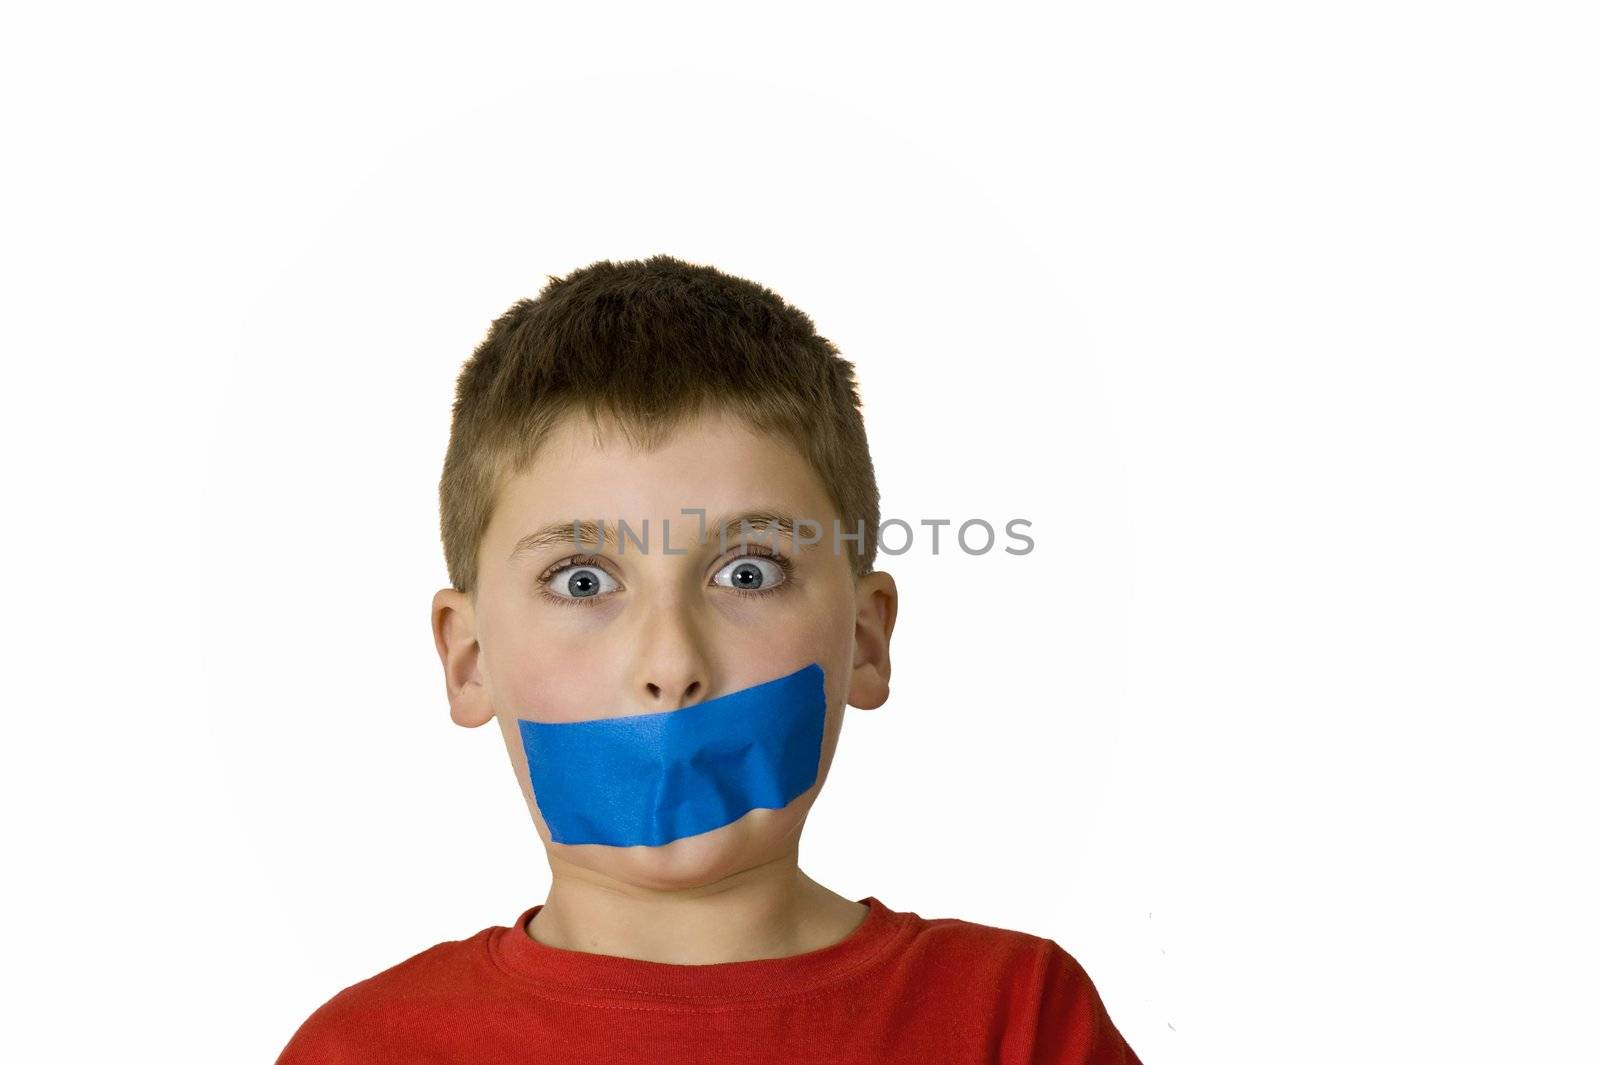 A censored young man